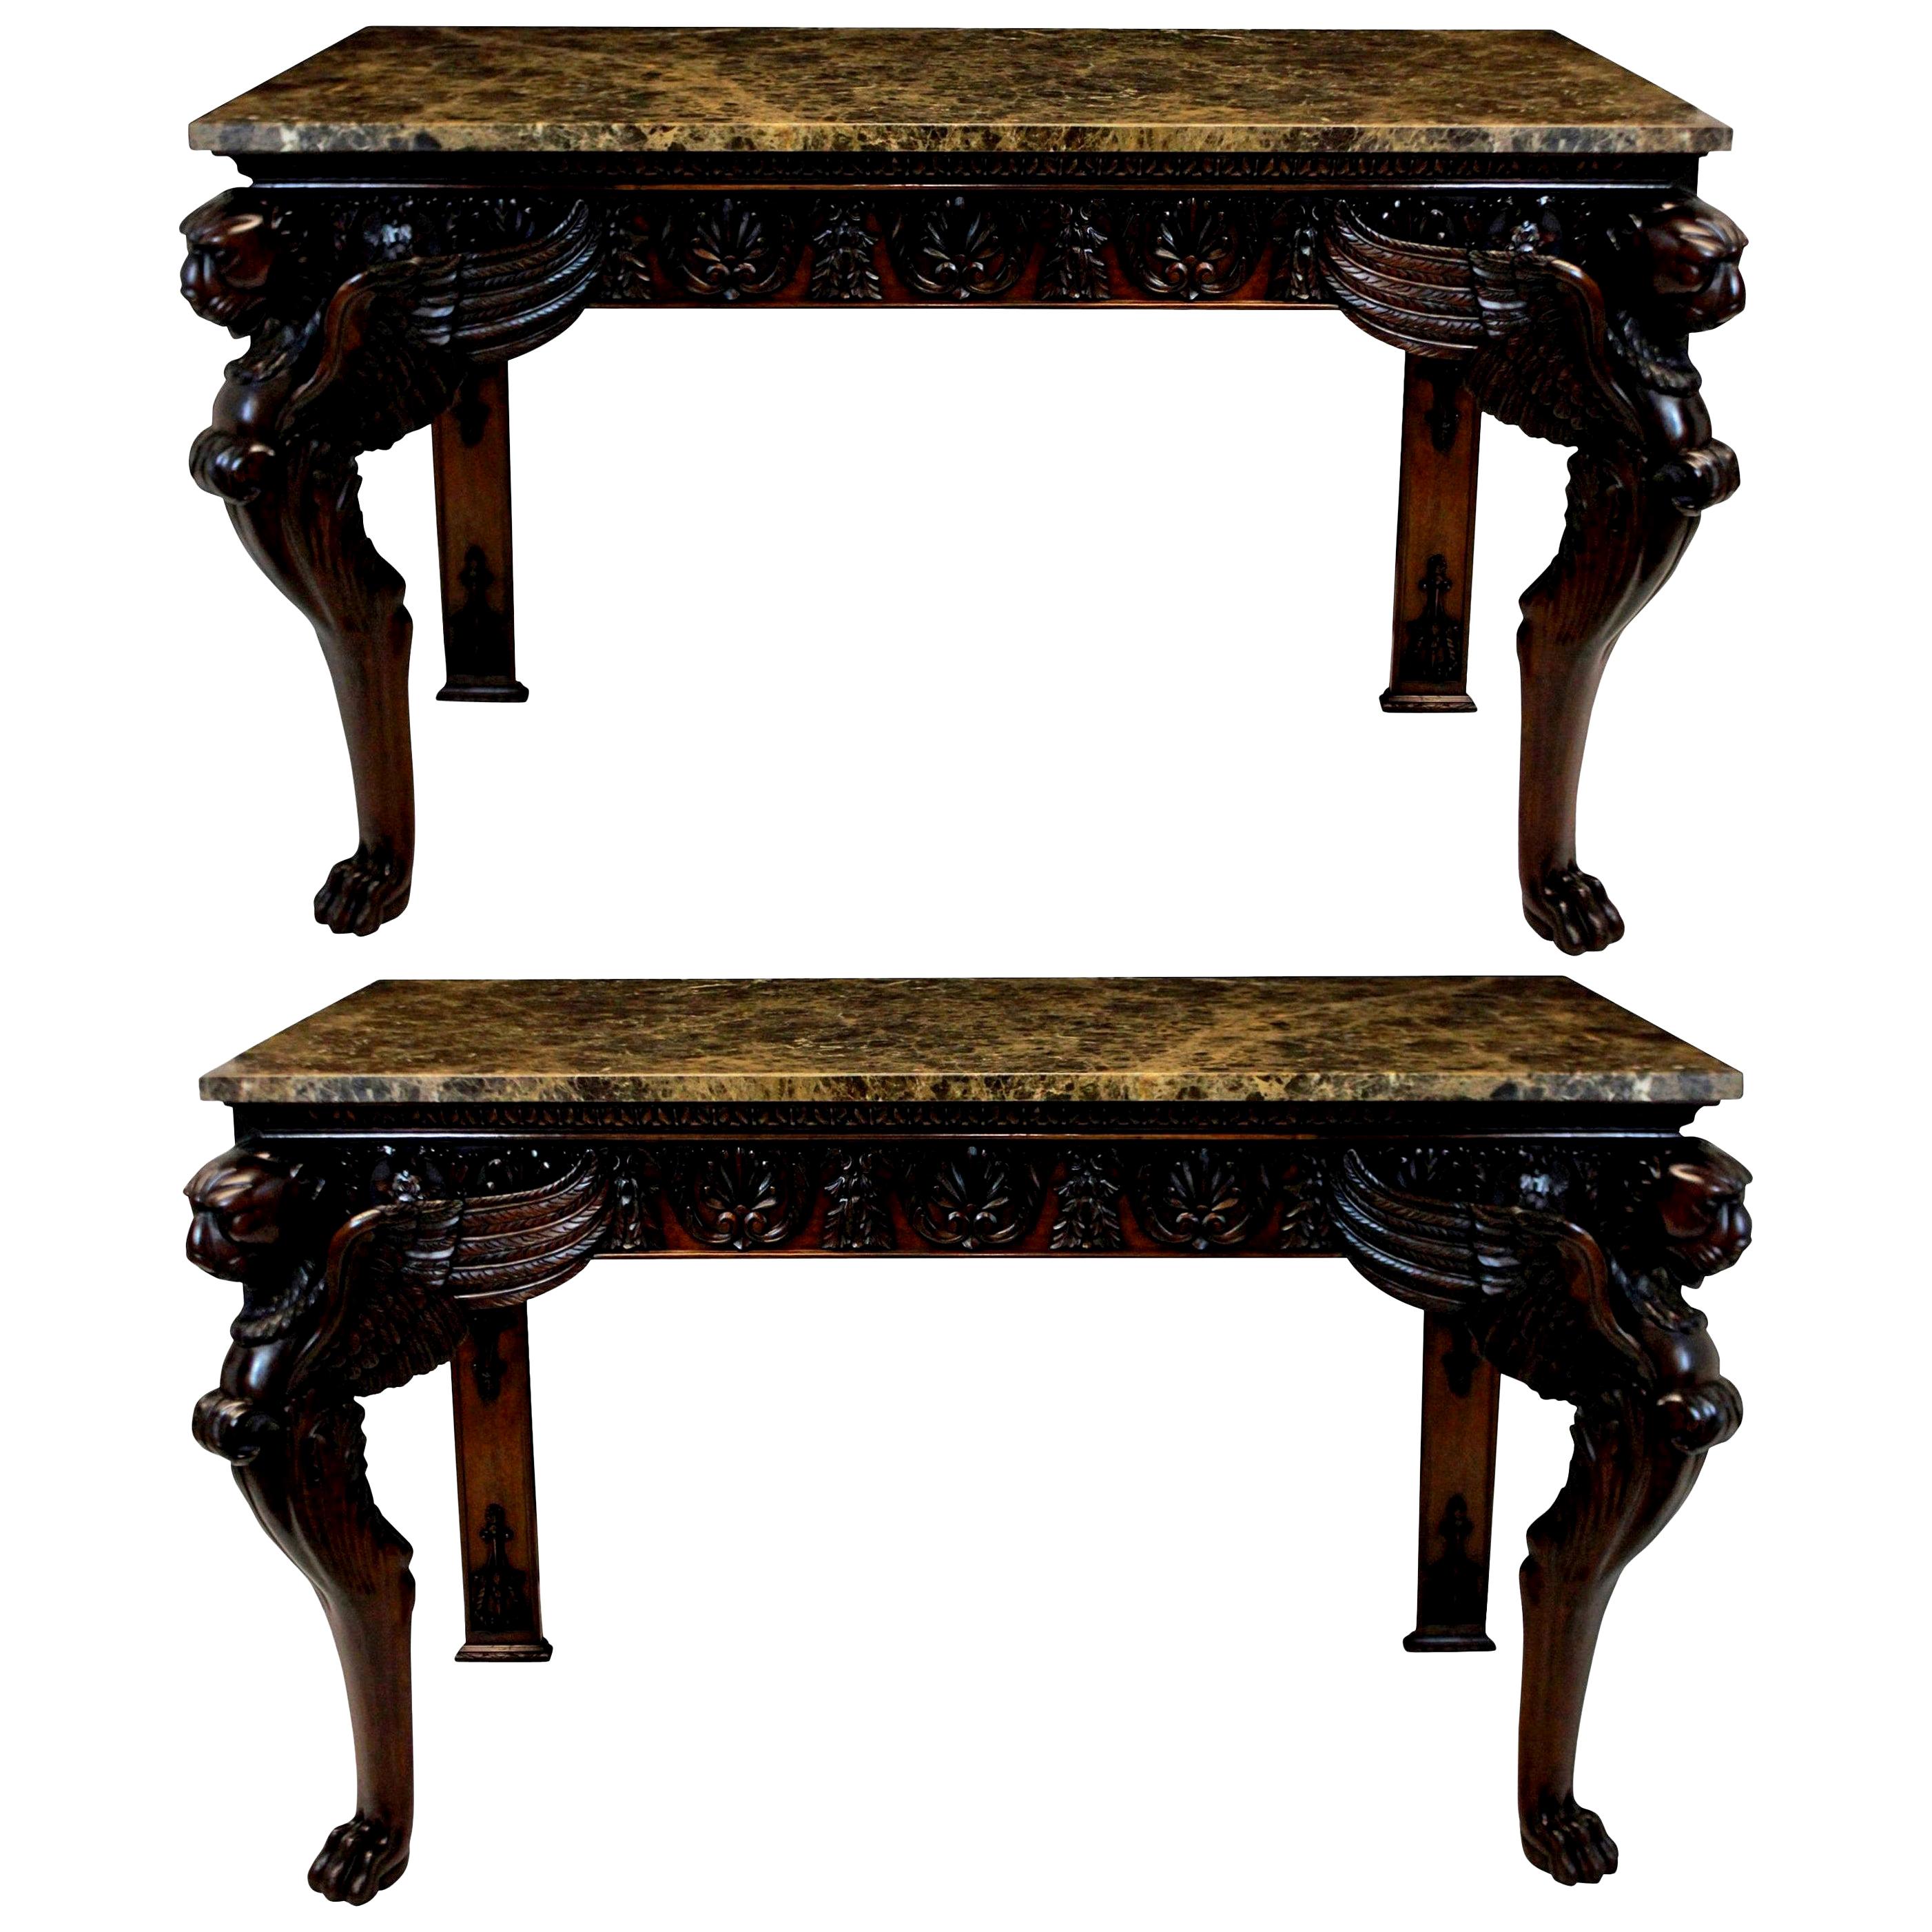 Pair of Large Mahogany 18th Century Style Console Tables